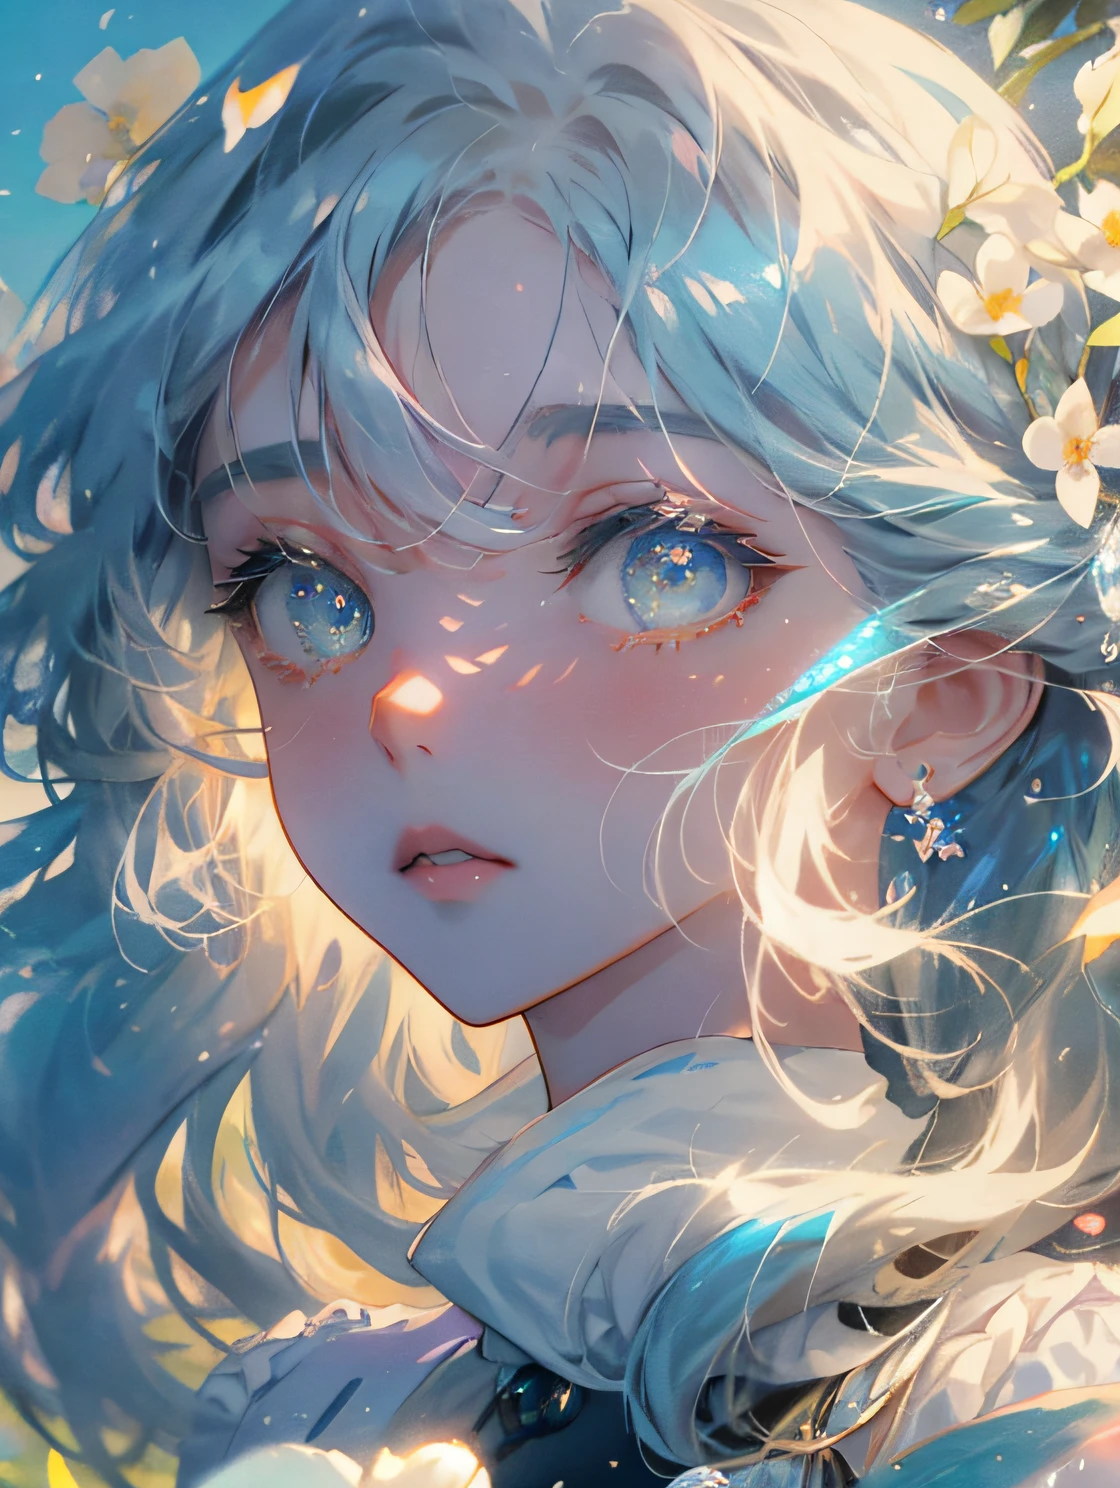 (high quality 8k), (watercolor paiting), ((Soft light)), The presence of flowers in the hair、Anime girl on blue sky background, Beautiful Anime Portrait, Detailed Digital Anime Art, digital anime illustration, soft anime illustration, beautiful digital illustrations, clean detailed anime art, Stunning anime face portrait, digital anime art, beautiful digital works of art, Detailed face, Detailed eyes, Translucent eyes, white blossoms,